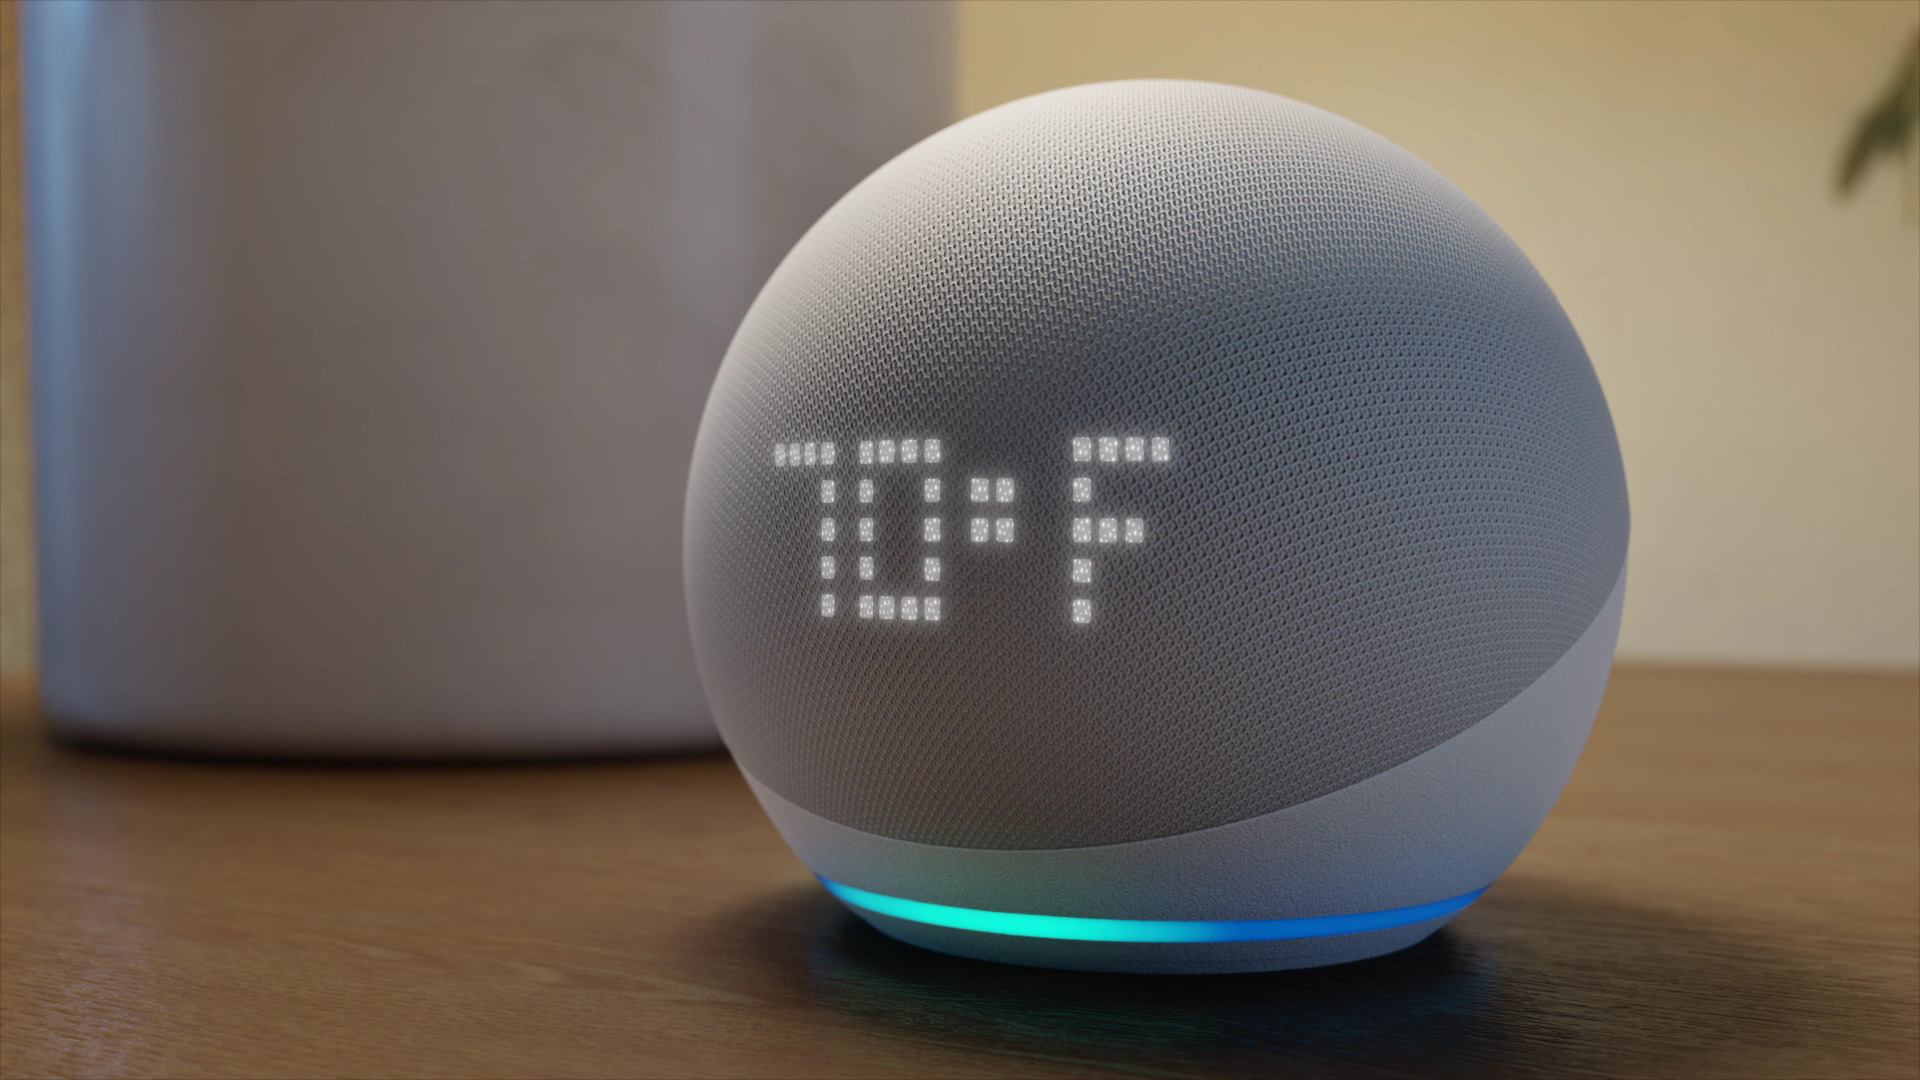 The new Echo Dot with Clock shows the temperature